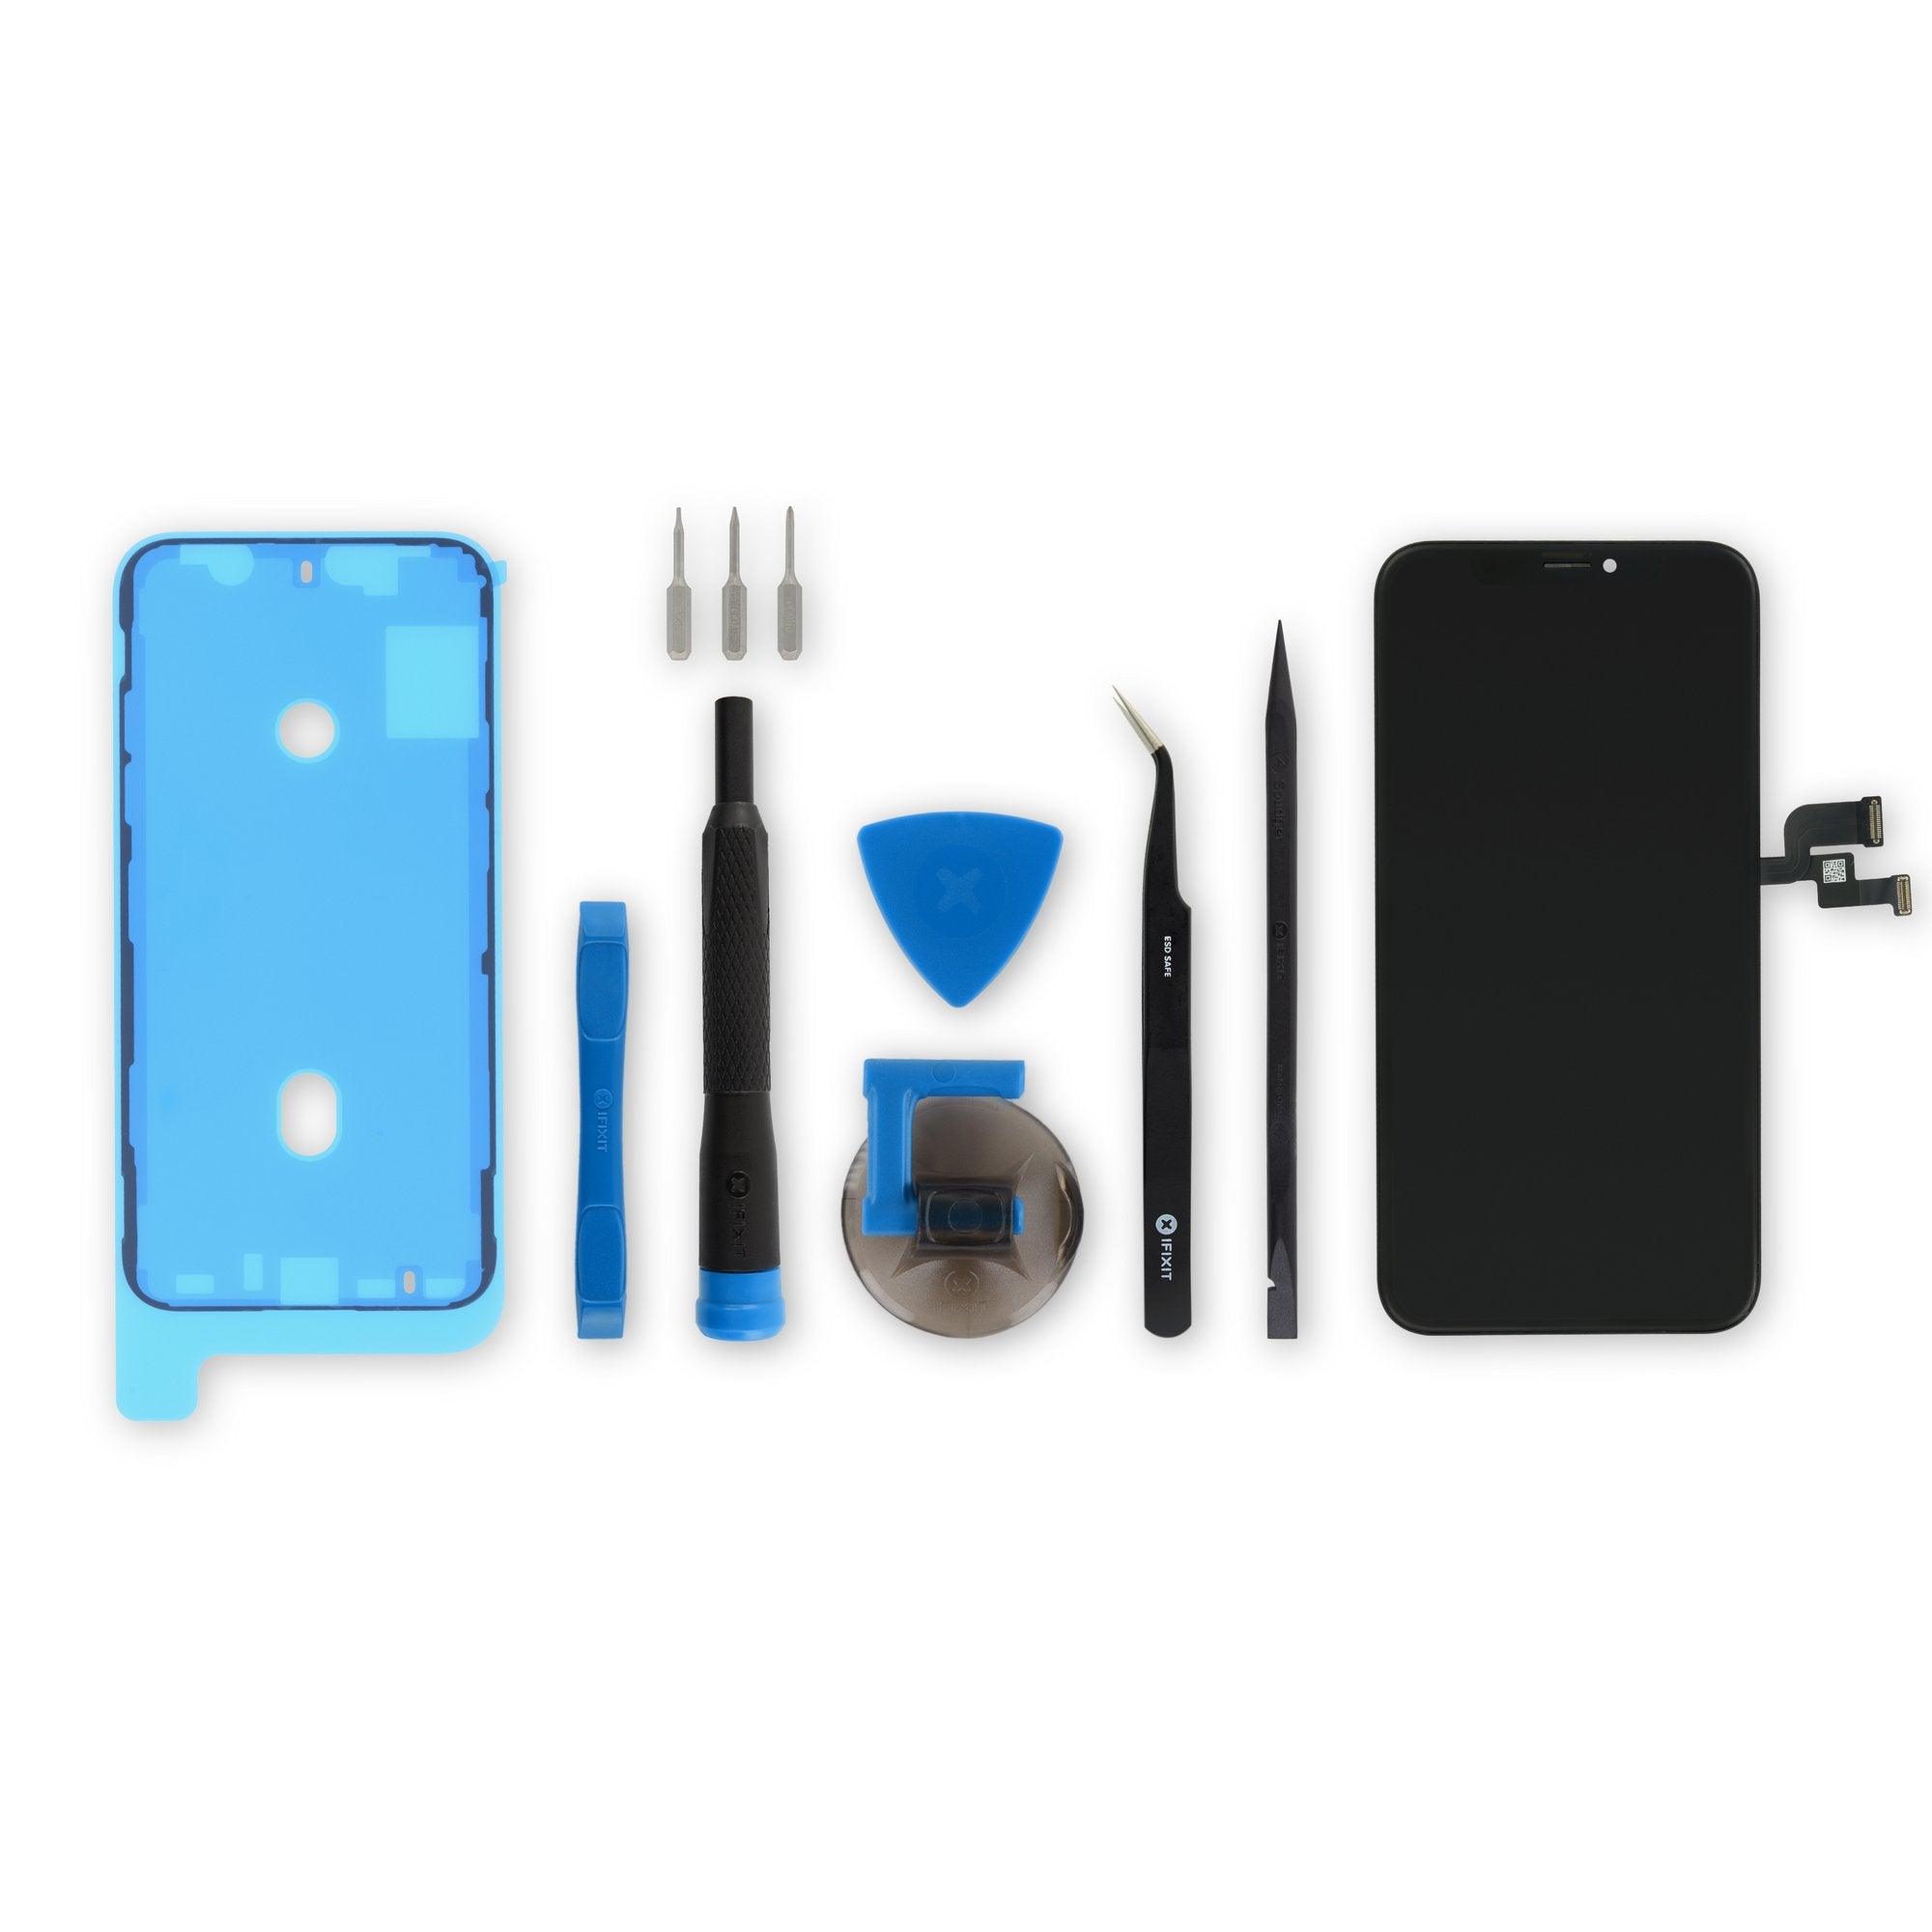 iPhone X Screen: LCD / OLED and Digitizer Repair Kit - iFixit